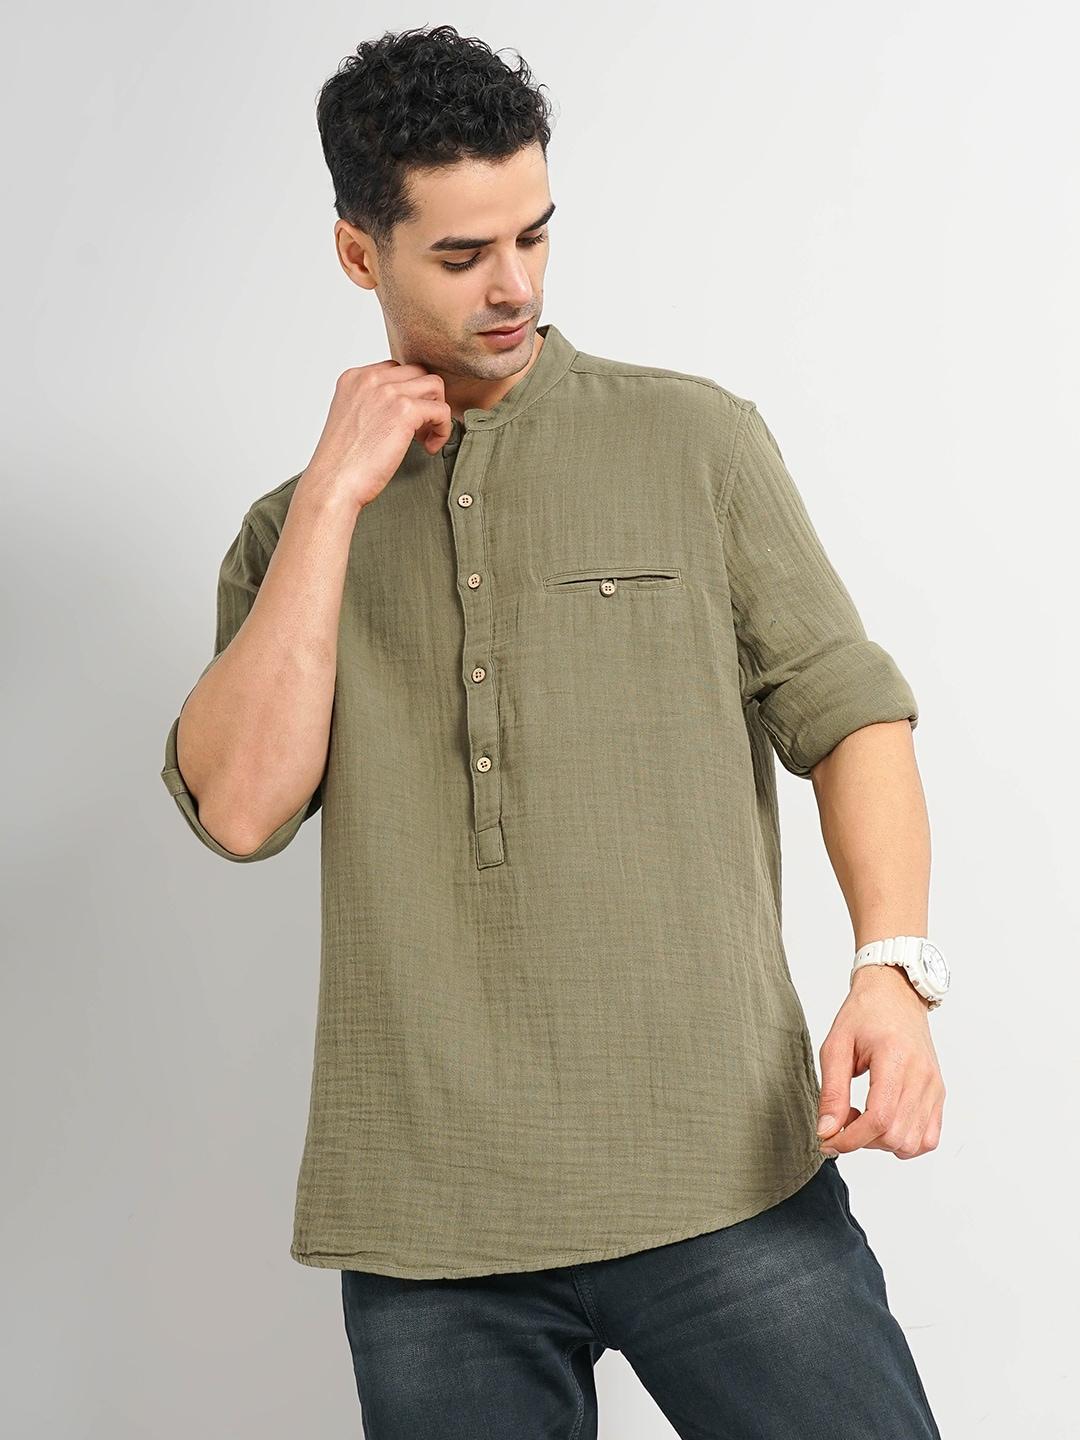 celio-spread-collar-long-sleeves-classic-casual-regular-fit-cotton-shirt